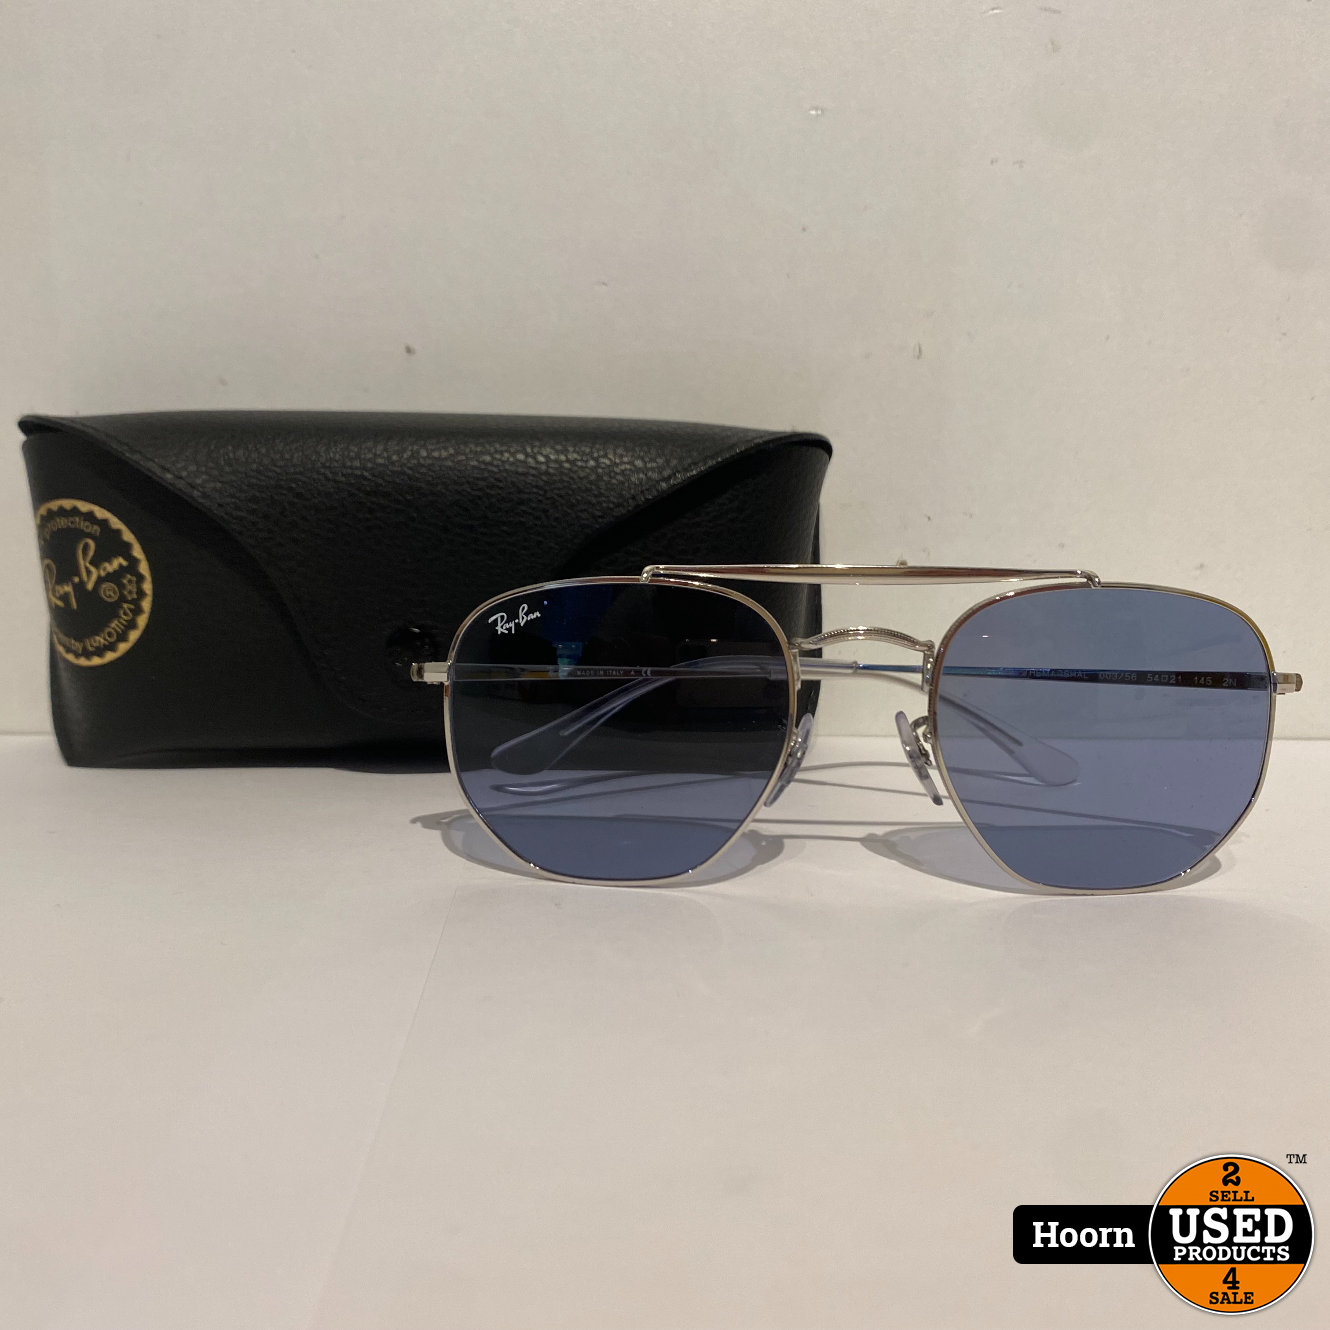 wrijving Vies Voorzien Ray-Ban RB3648 Marshal Edition in Koker - Used Products Hoorn